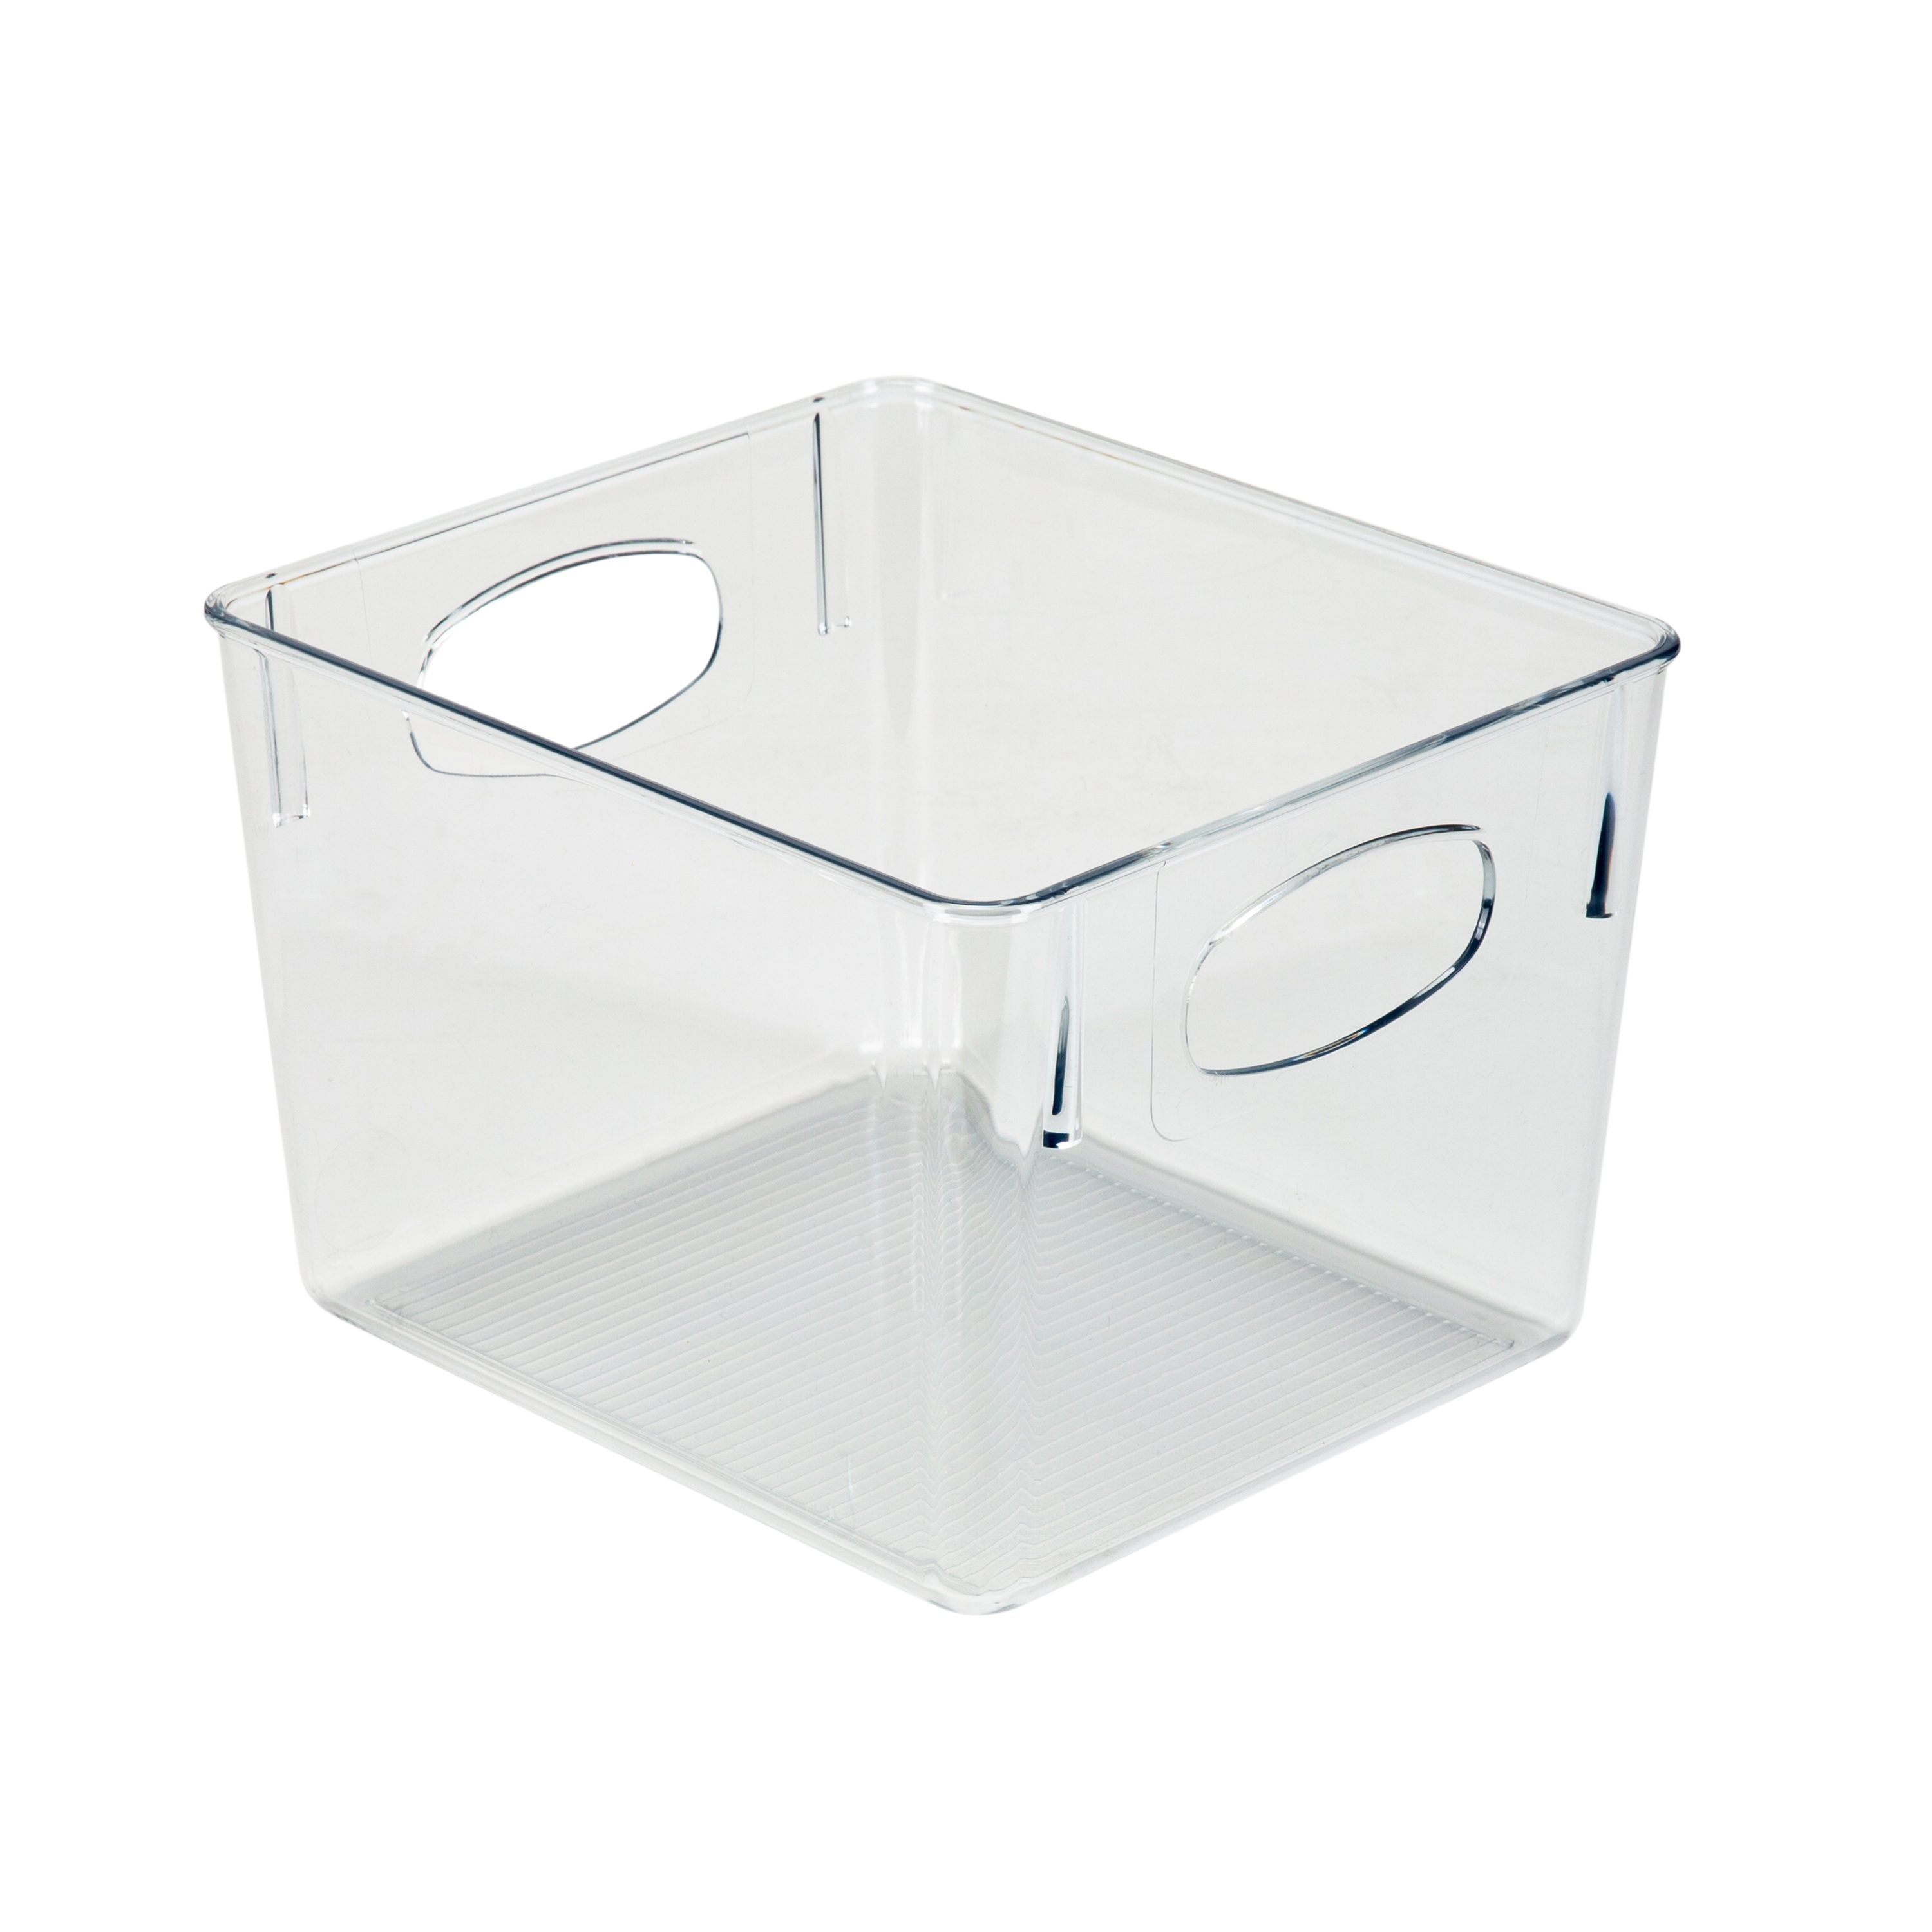 Sorbus Cleaning Supplies Organizer - Clear Containers for Organizing  Cleaning Supplies Under the Sink - Clear Bins for Organizing Kitchen and  Bathroom